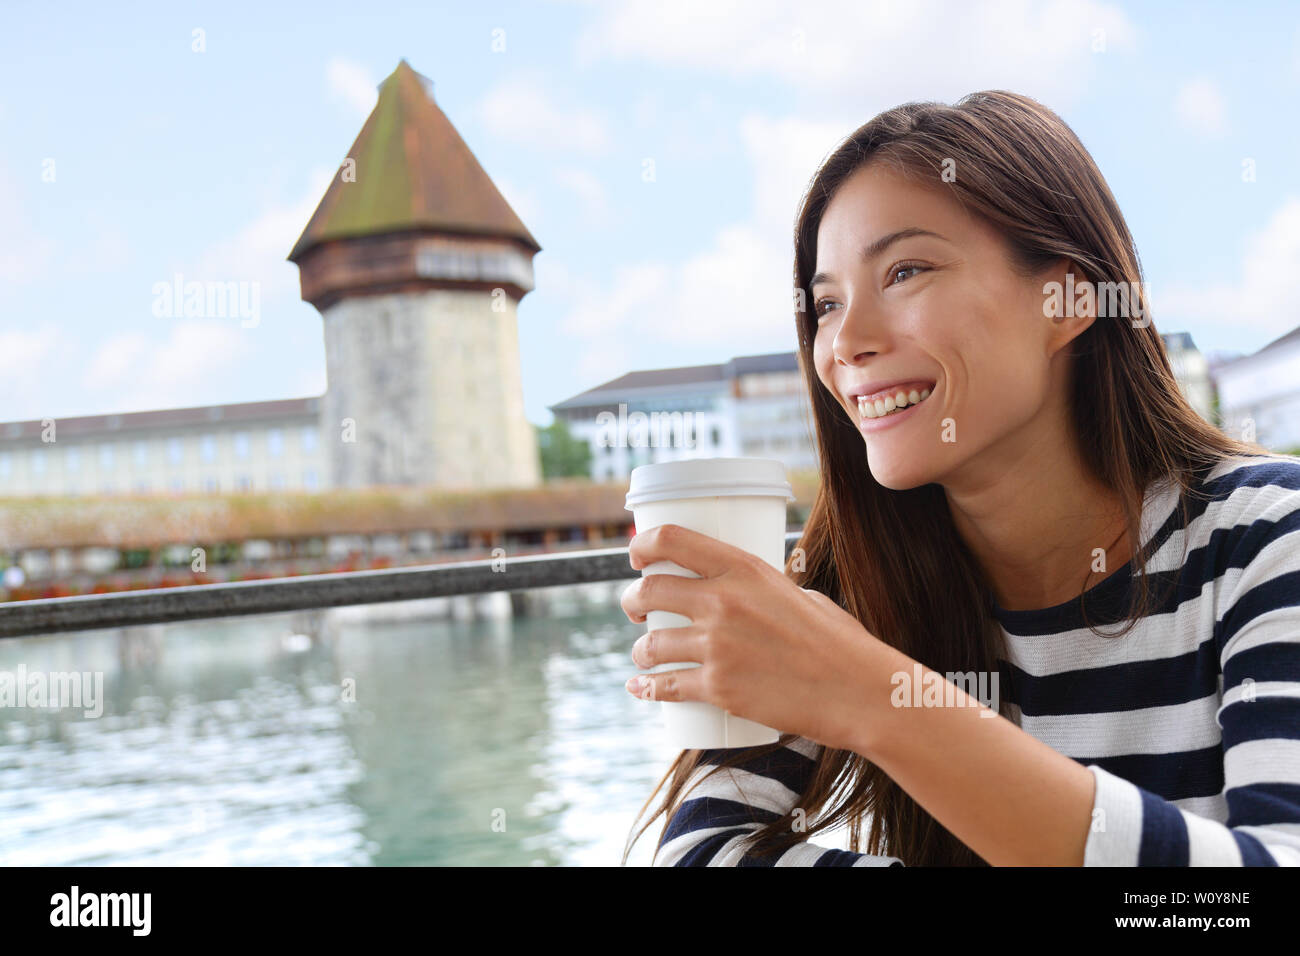 Woman drinking coffee at cafe in Lucerne, Switzerland. Casual girl tourist on travel visiting landmarks tourists attraction Kapellbrucke Chapel Bridge with Wasserturm water tower on Reuss River. Stock Photo